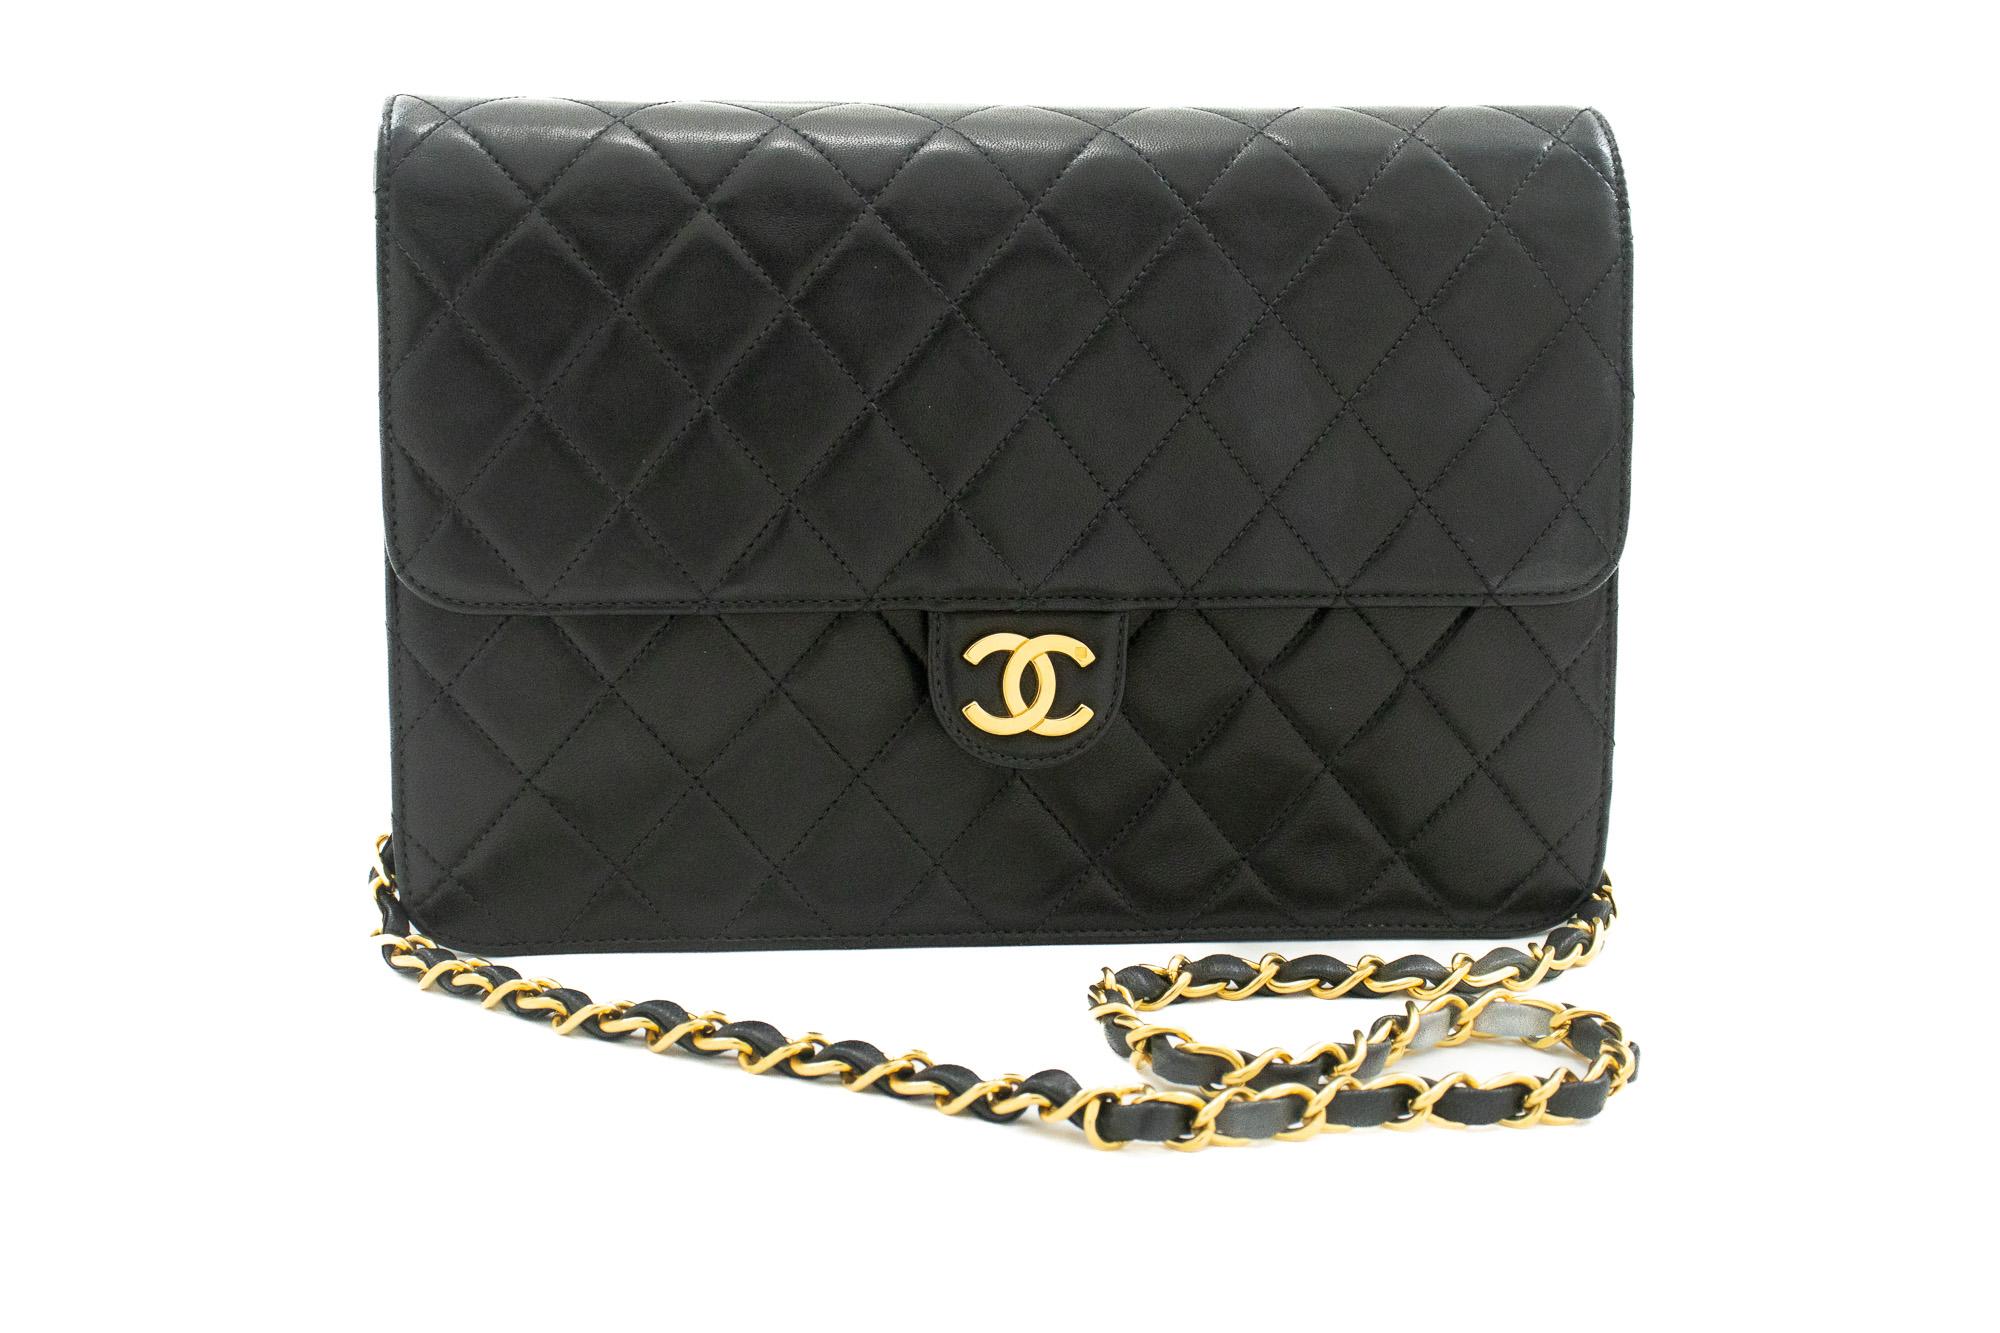 An authentic CHANEL Chain Shoulder Bag Clutch Black Quilted Flap made of black Lambskin Purse. The color is Black. The outside material is Leather. The pattern is Solid. This item is Vintage / Classic. The year of manufacture would be